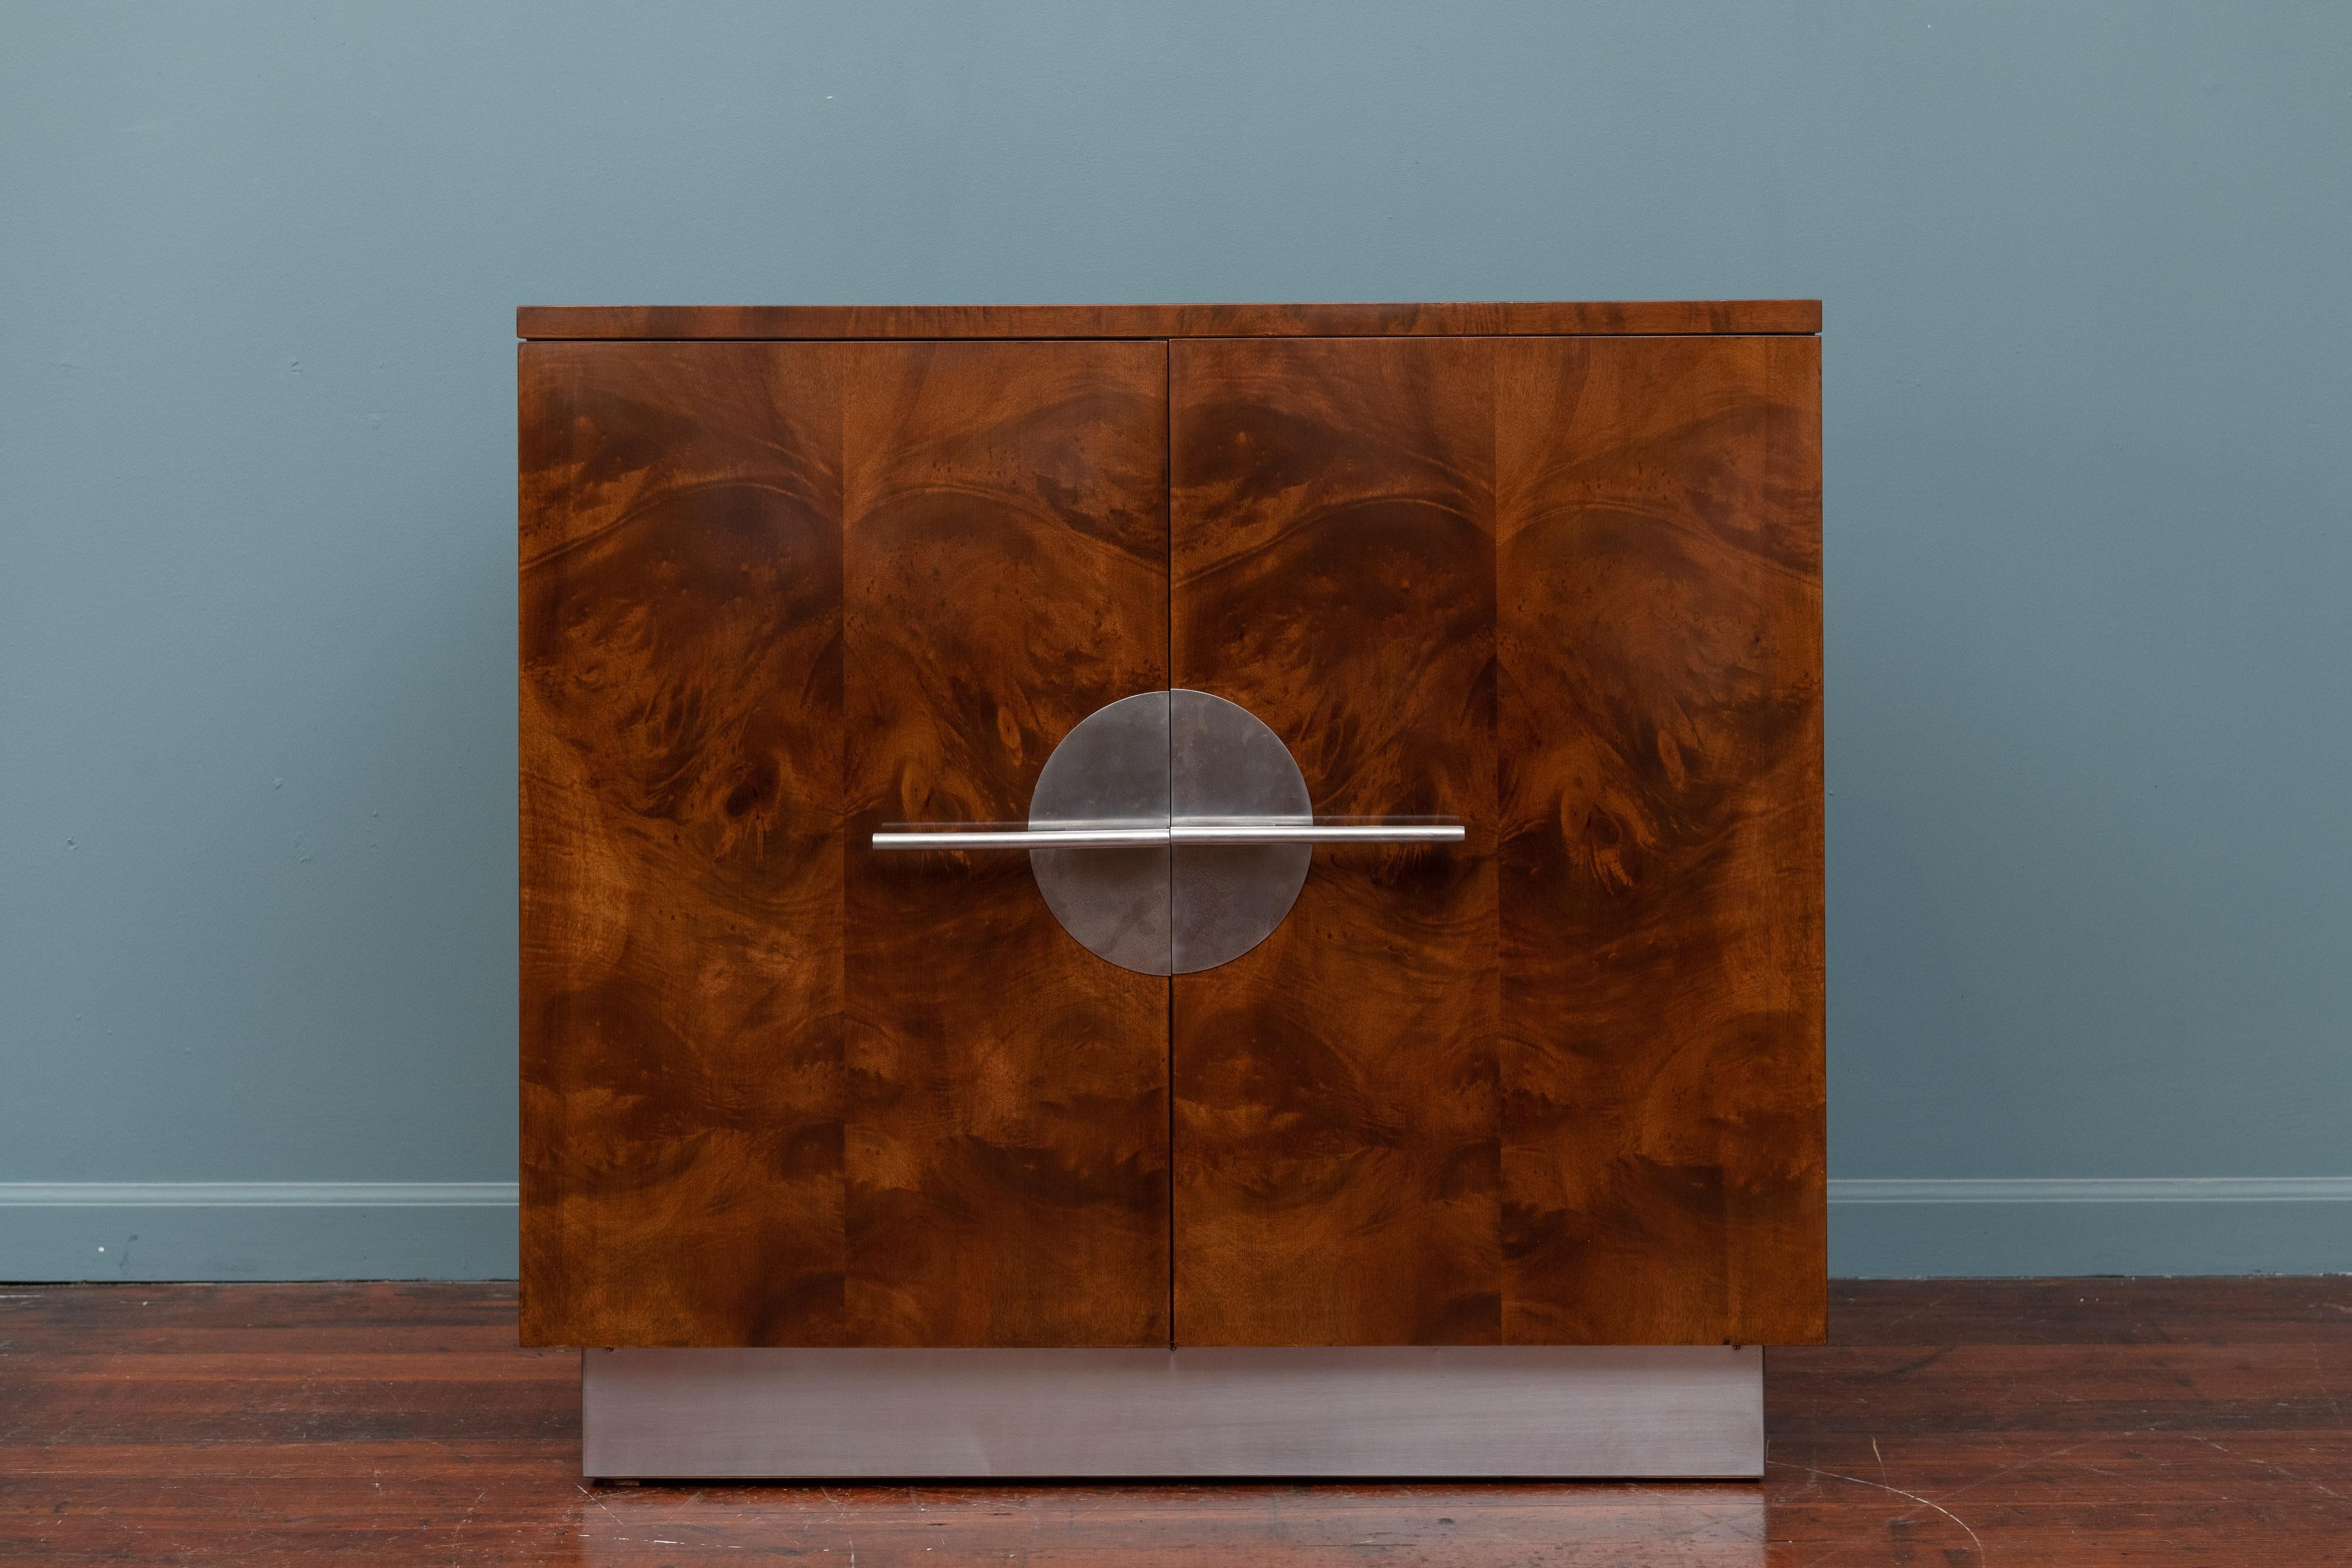 Streamline Modern cabinet designed by Walter Dorwin Teague for Hastings. Originally a server for a dining suite but perfect as a bar cabinet or storage. Newly refinished, polished and painted.